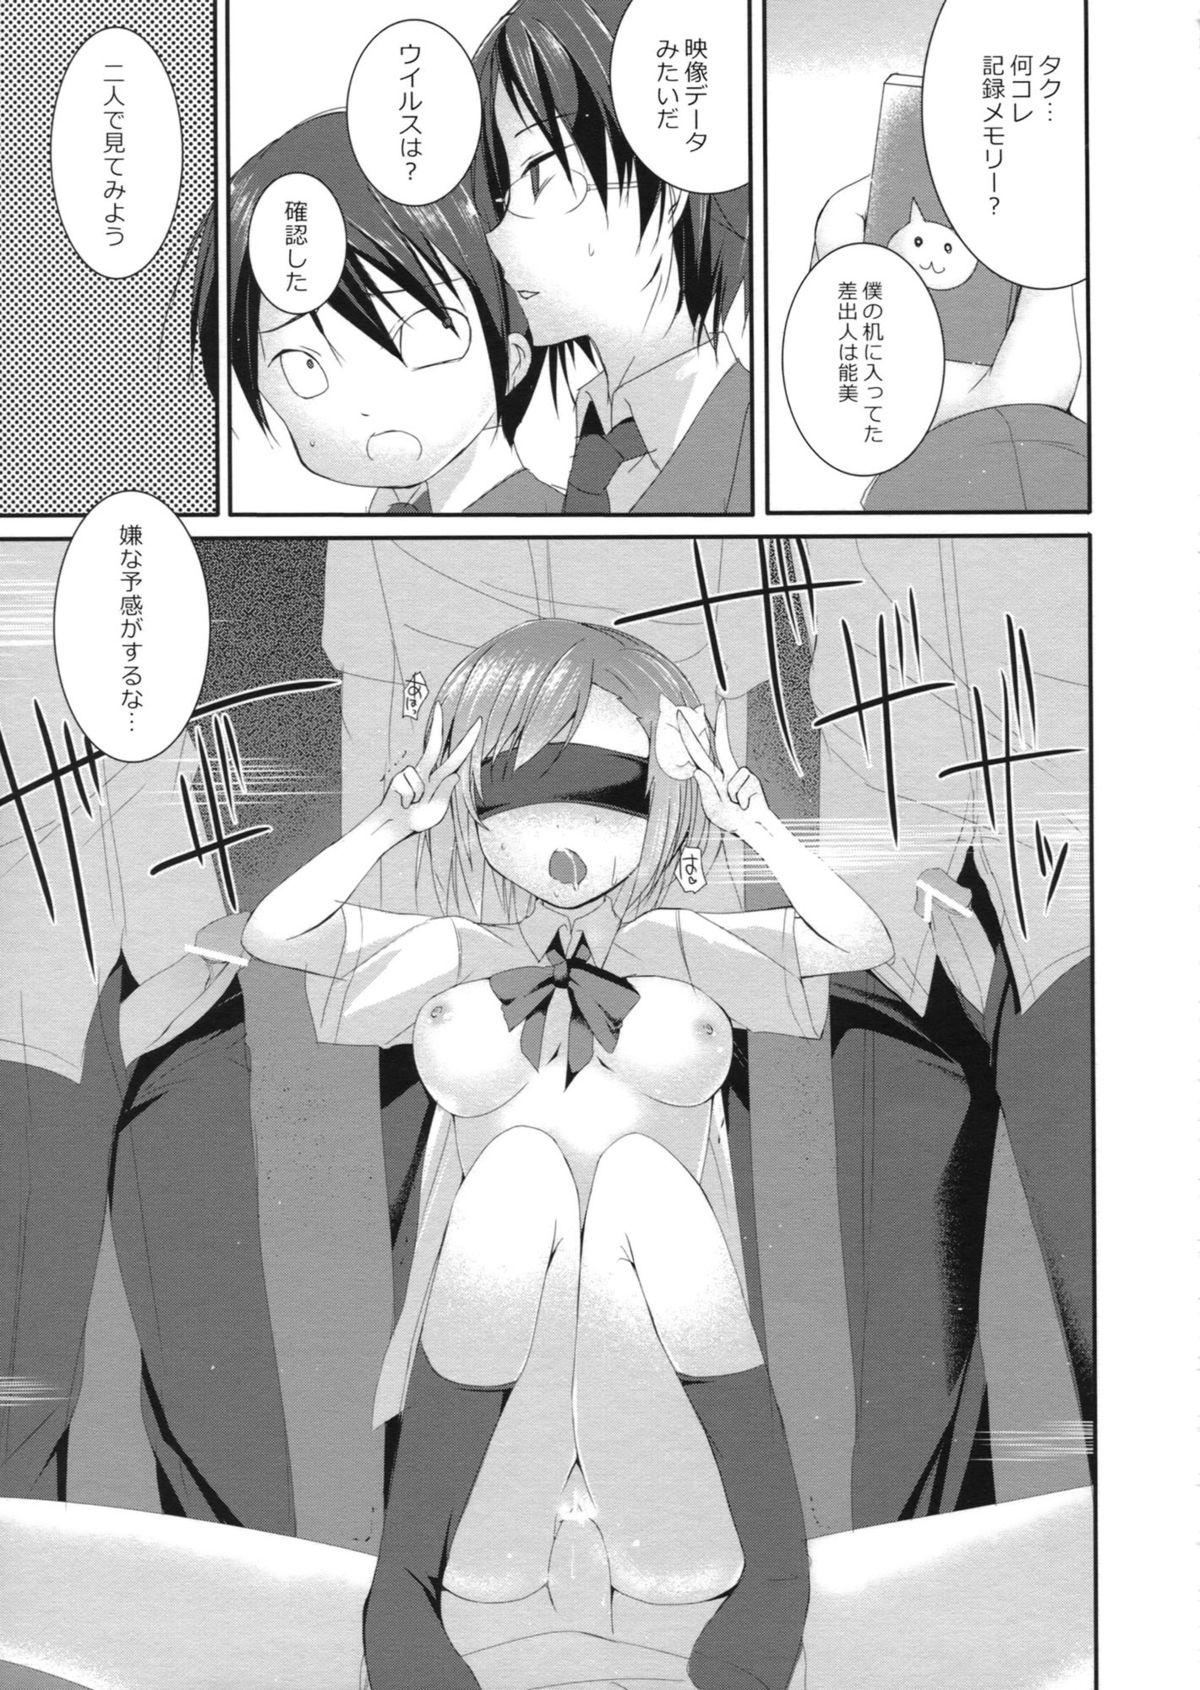 Ass Fucking Higher Than Dark Sky - Accel world Gay 3some - Page 12